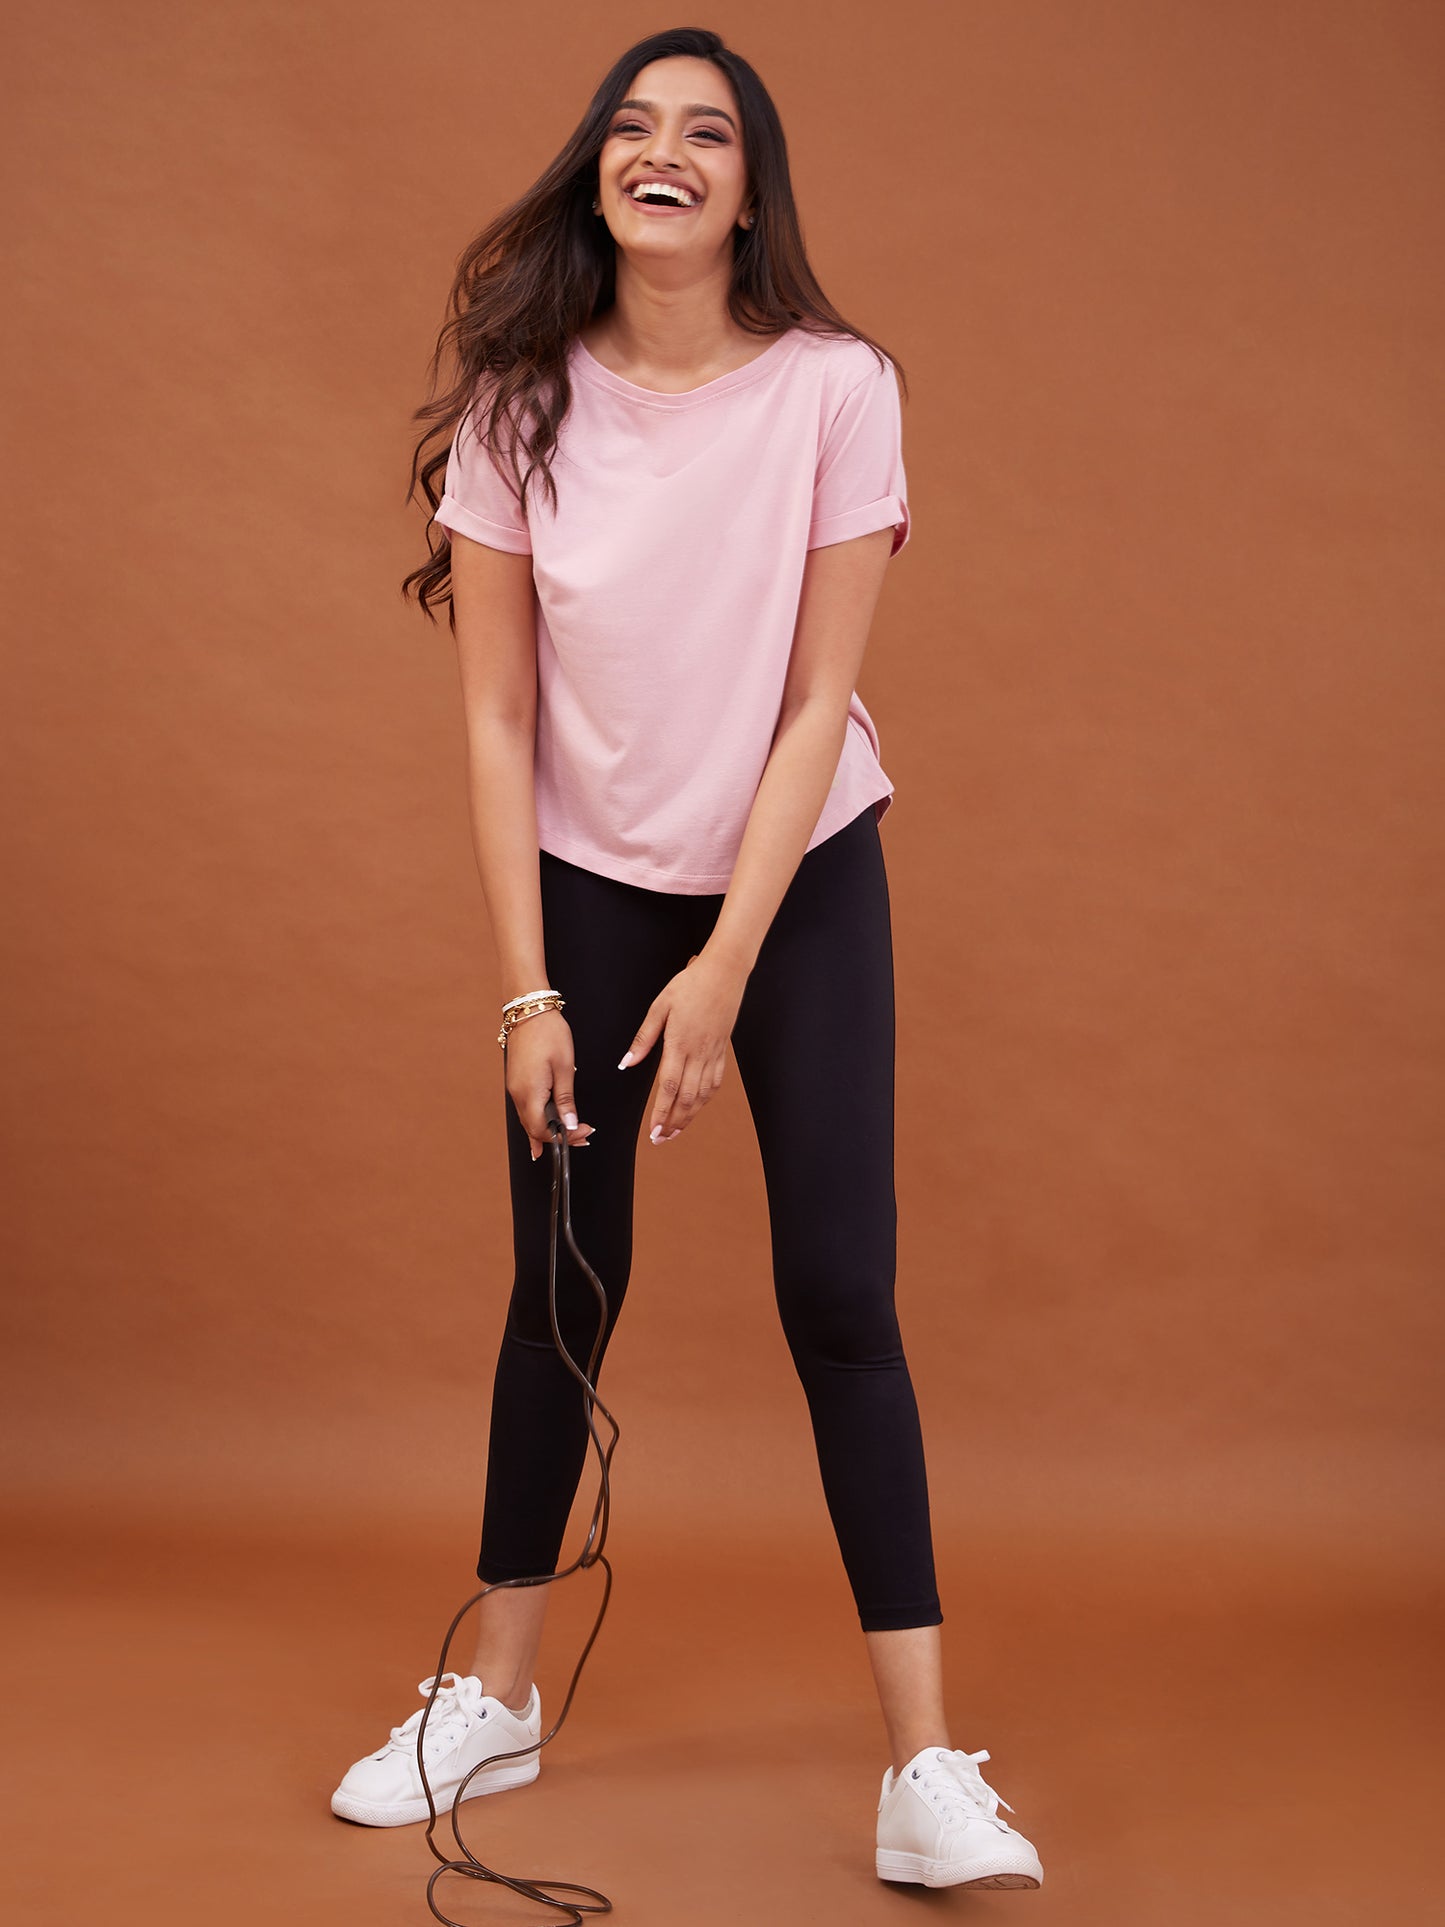 Nykd All Day Essential Cotton Modal Tee in Relaxed fit-NYLE048 Zephyr